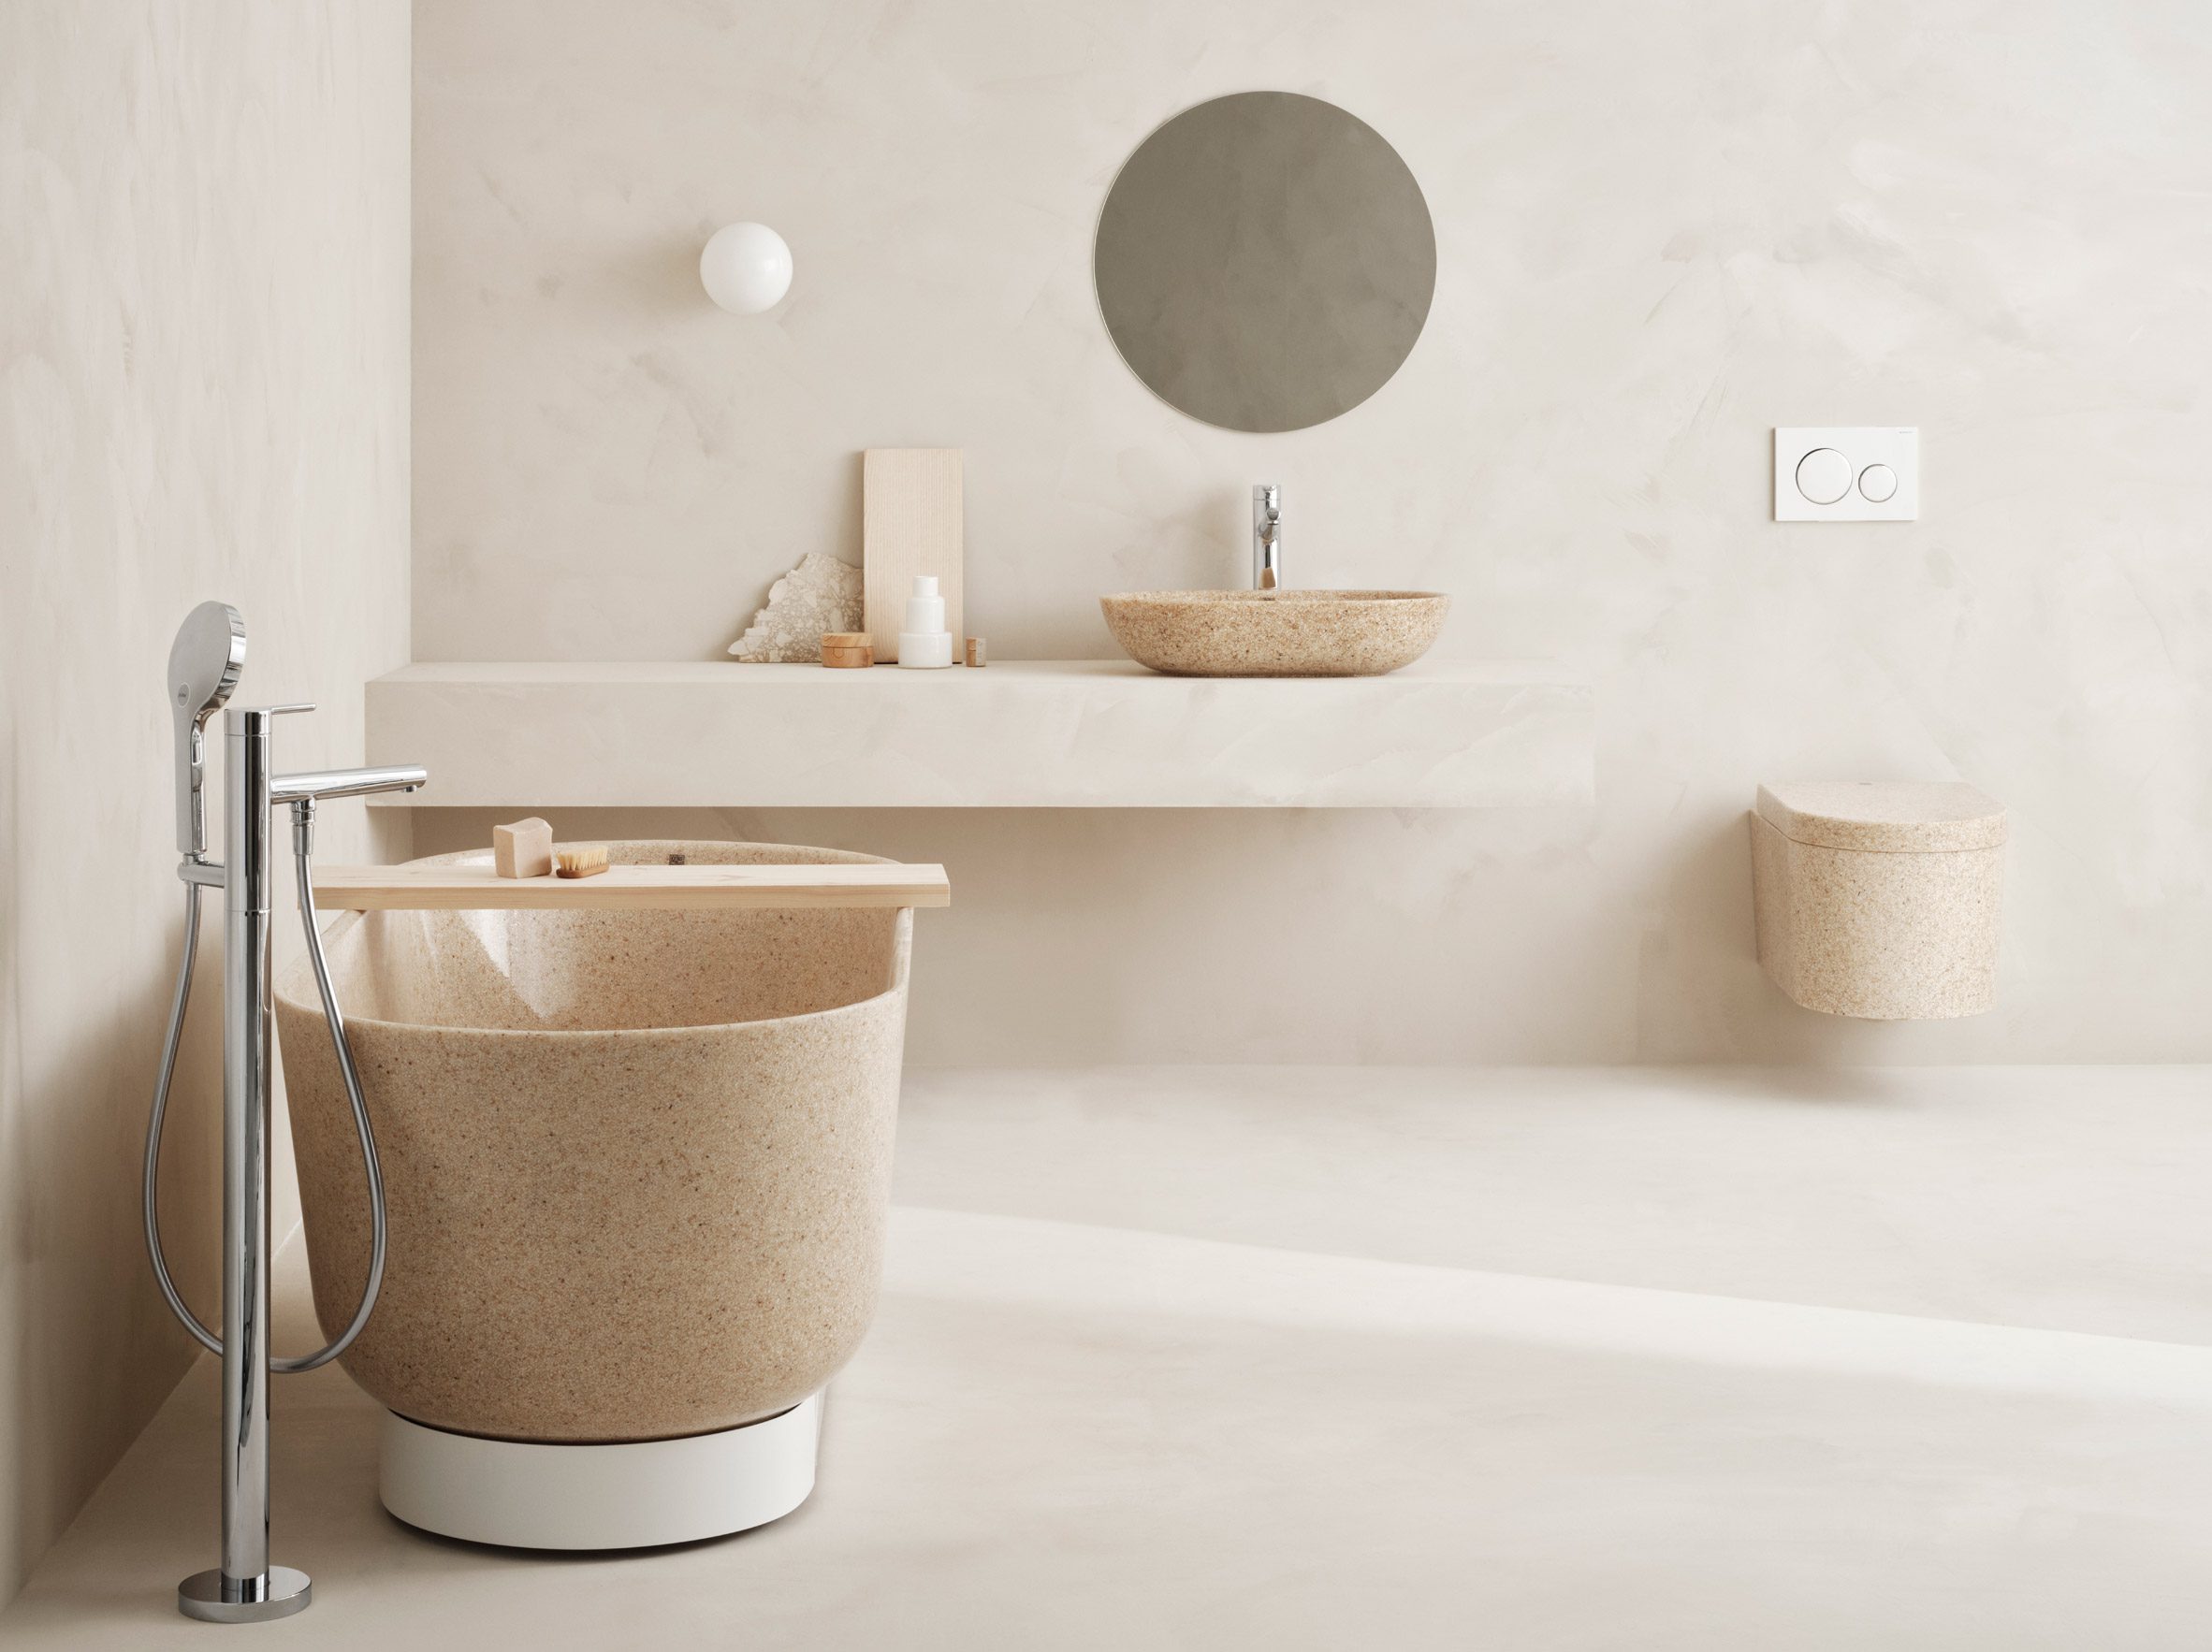 Block toilet and matching tub and wash basins by Woodio in a bathroom